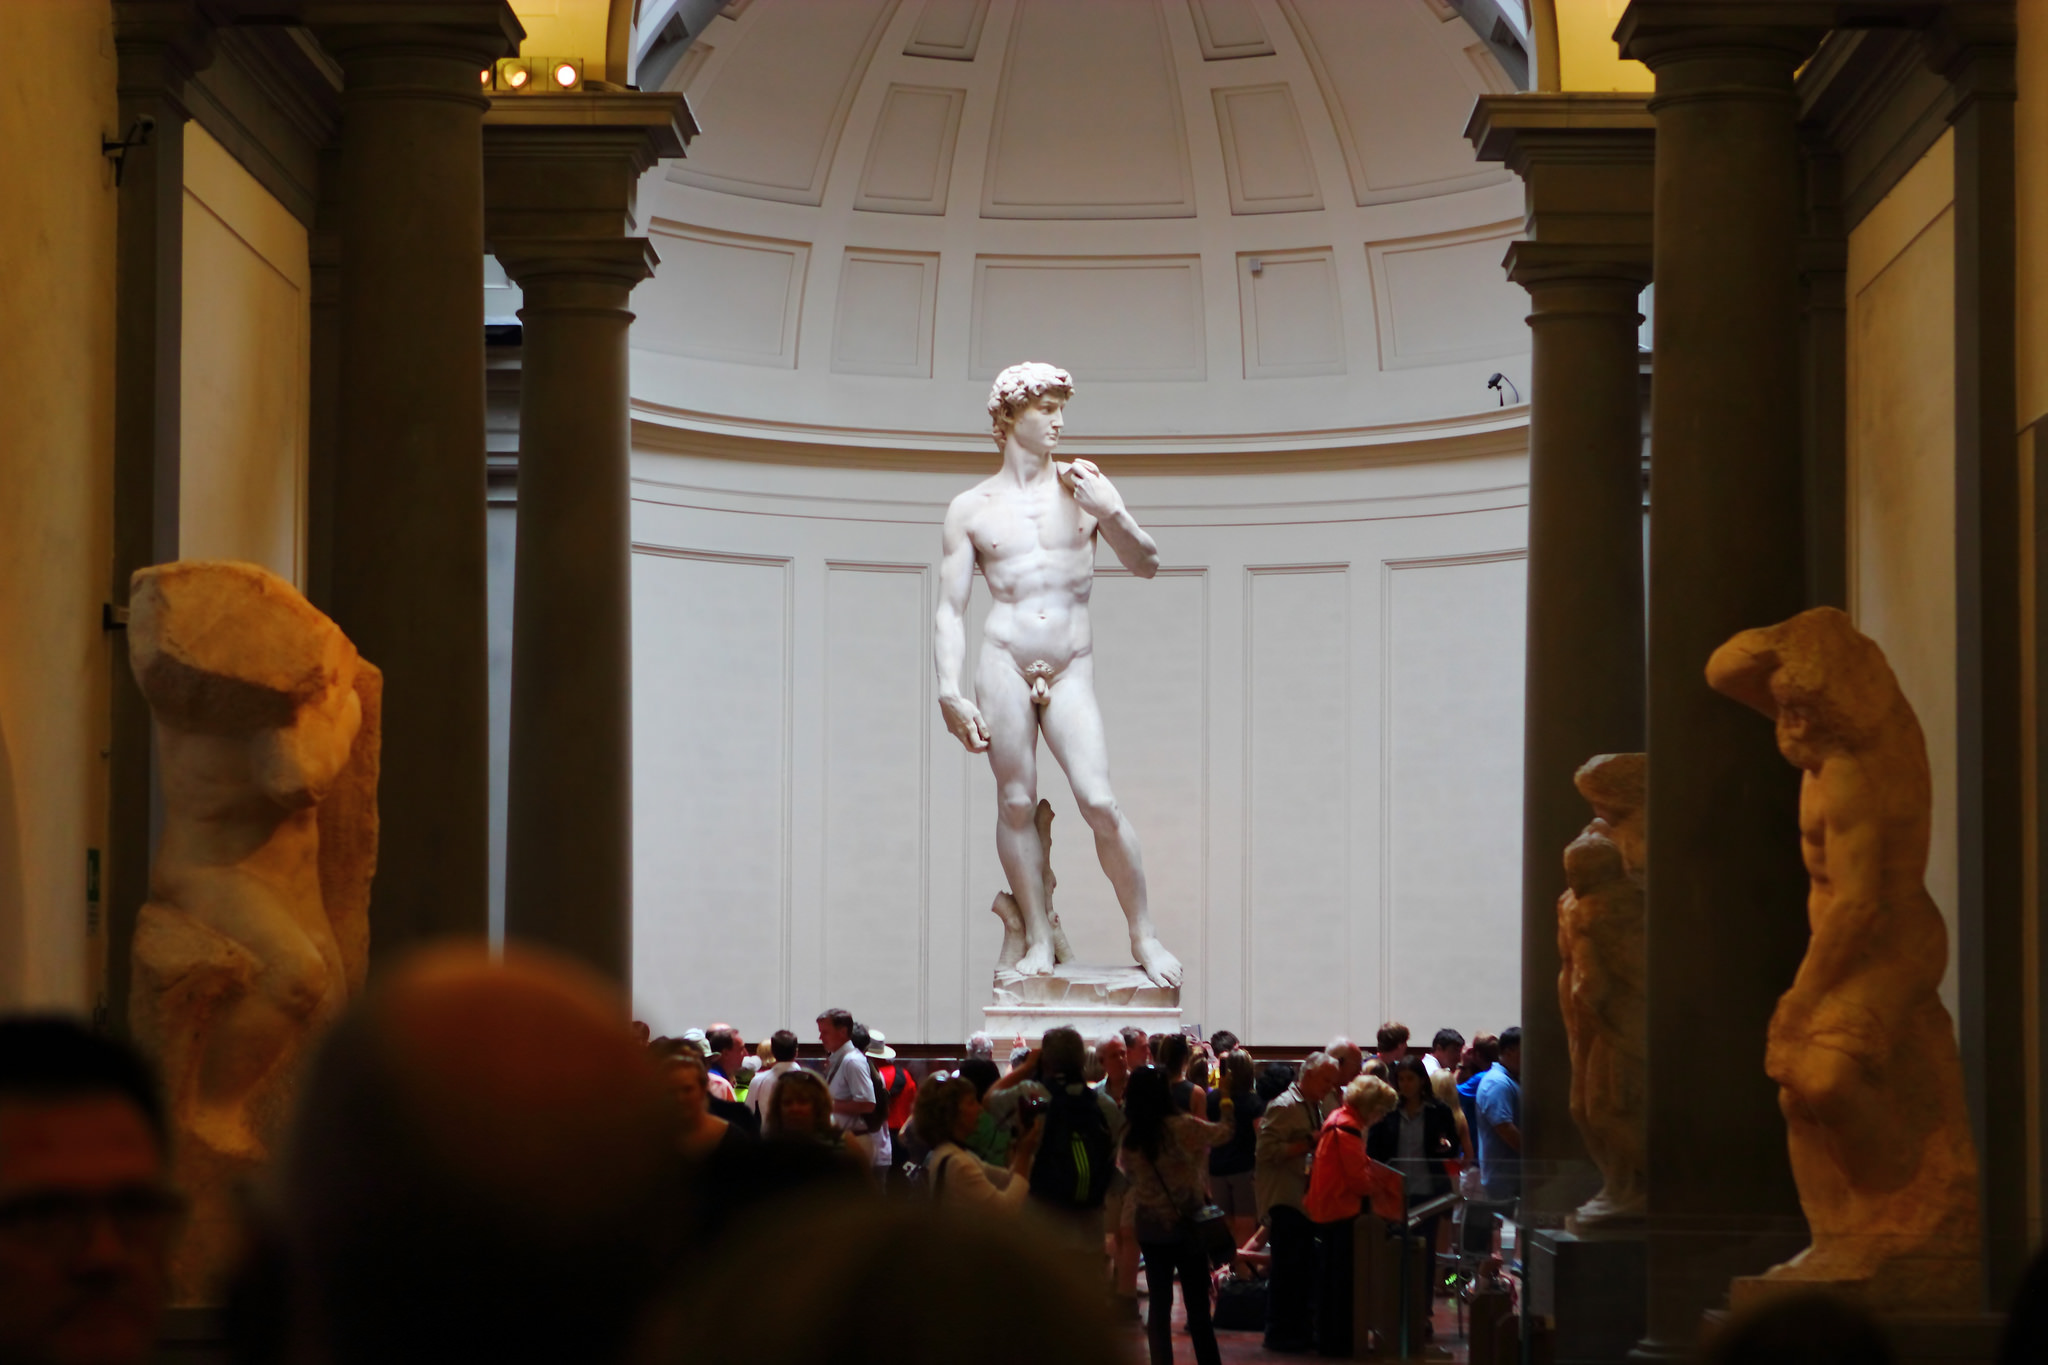 The David standing in a large circular room. The statue is raised on a pedestal, so it is not obstructed by the large crowd gathered in front of it.